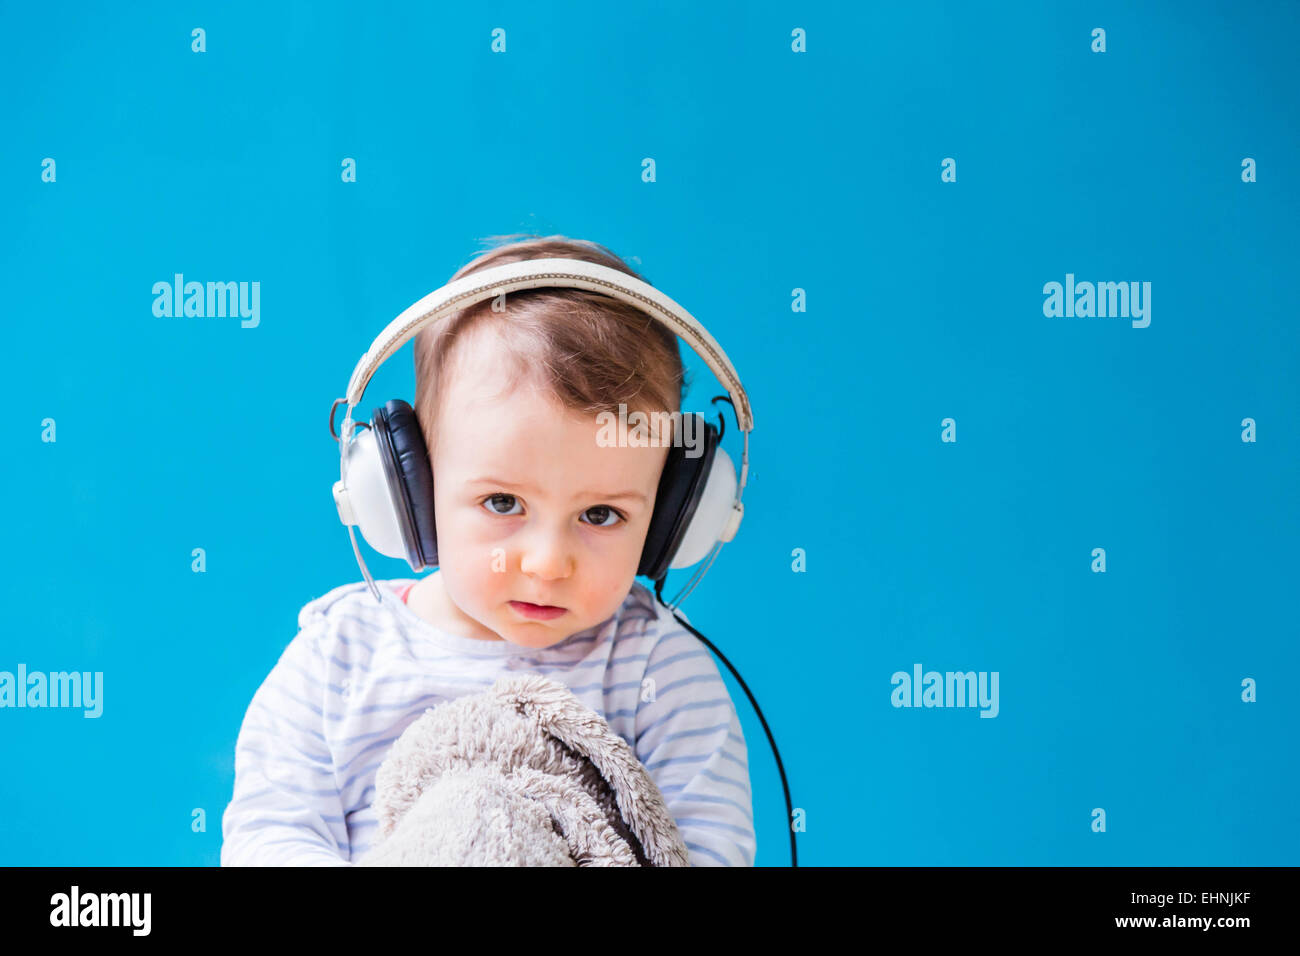 18 month-old baby boy listening music. Stock Photo